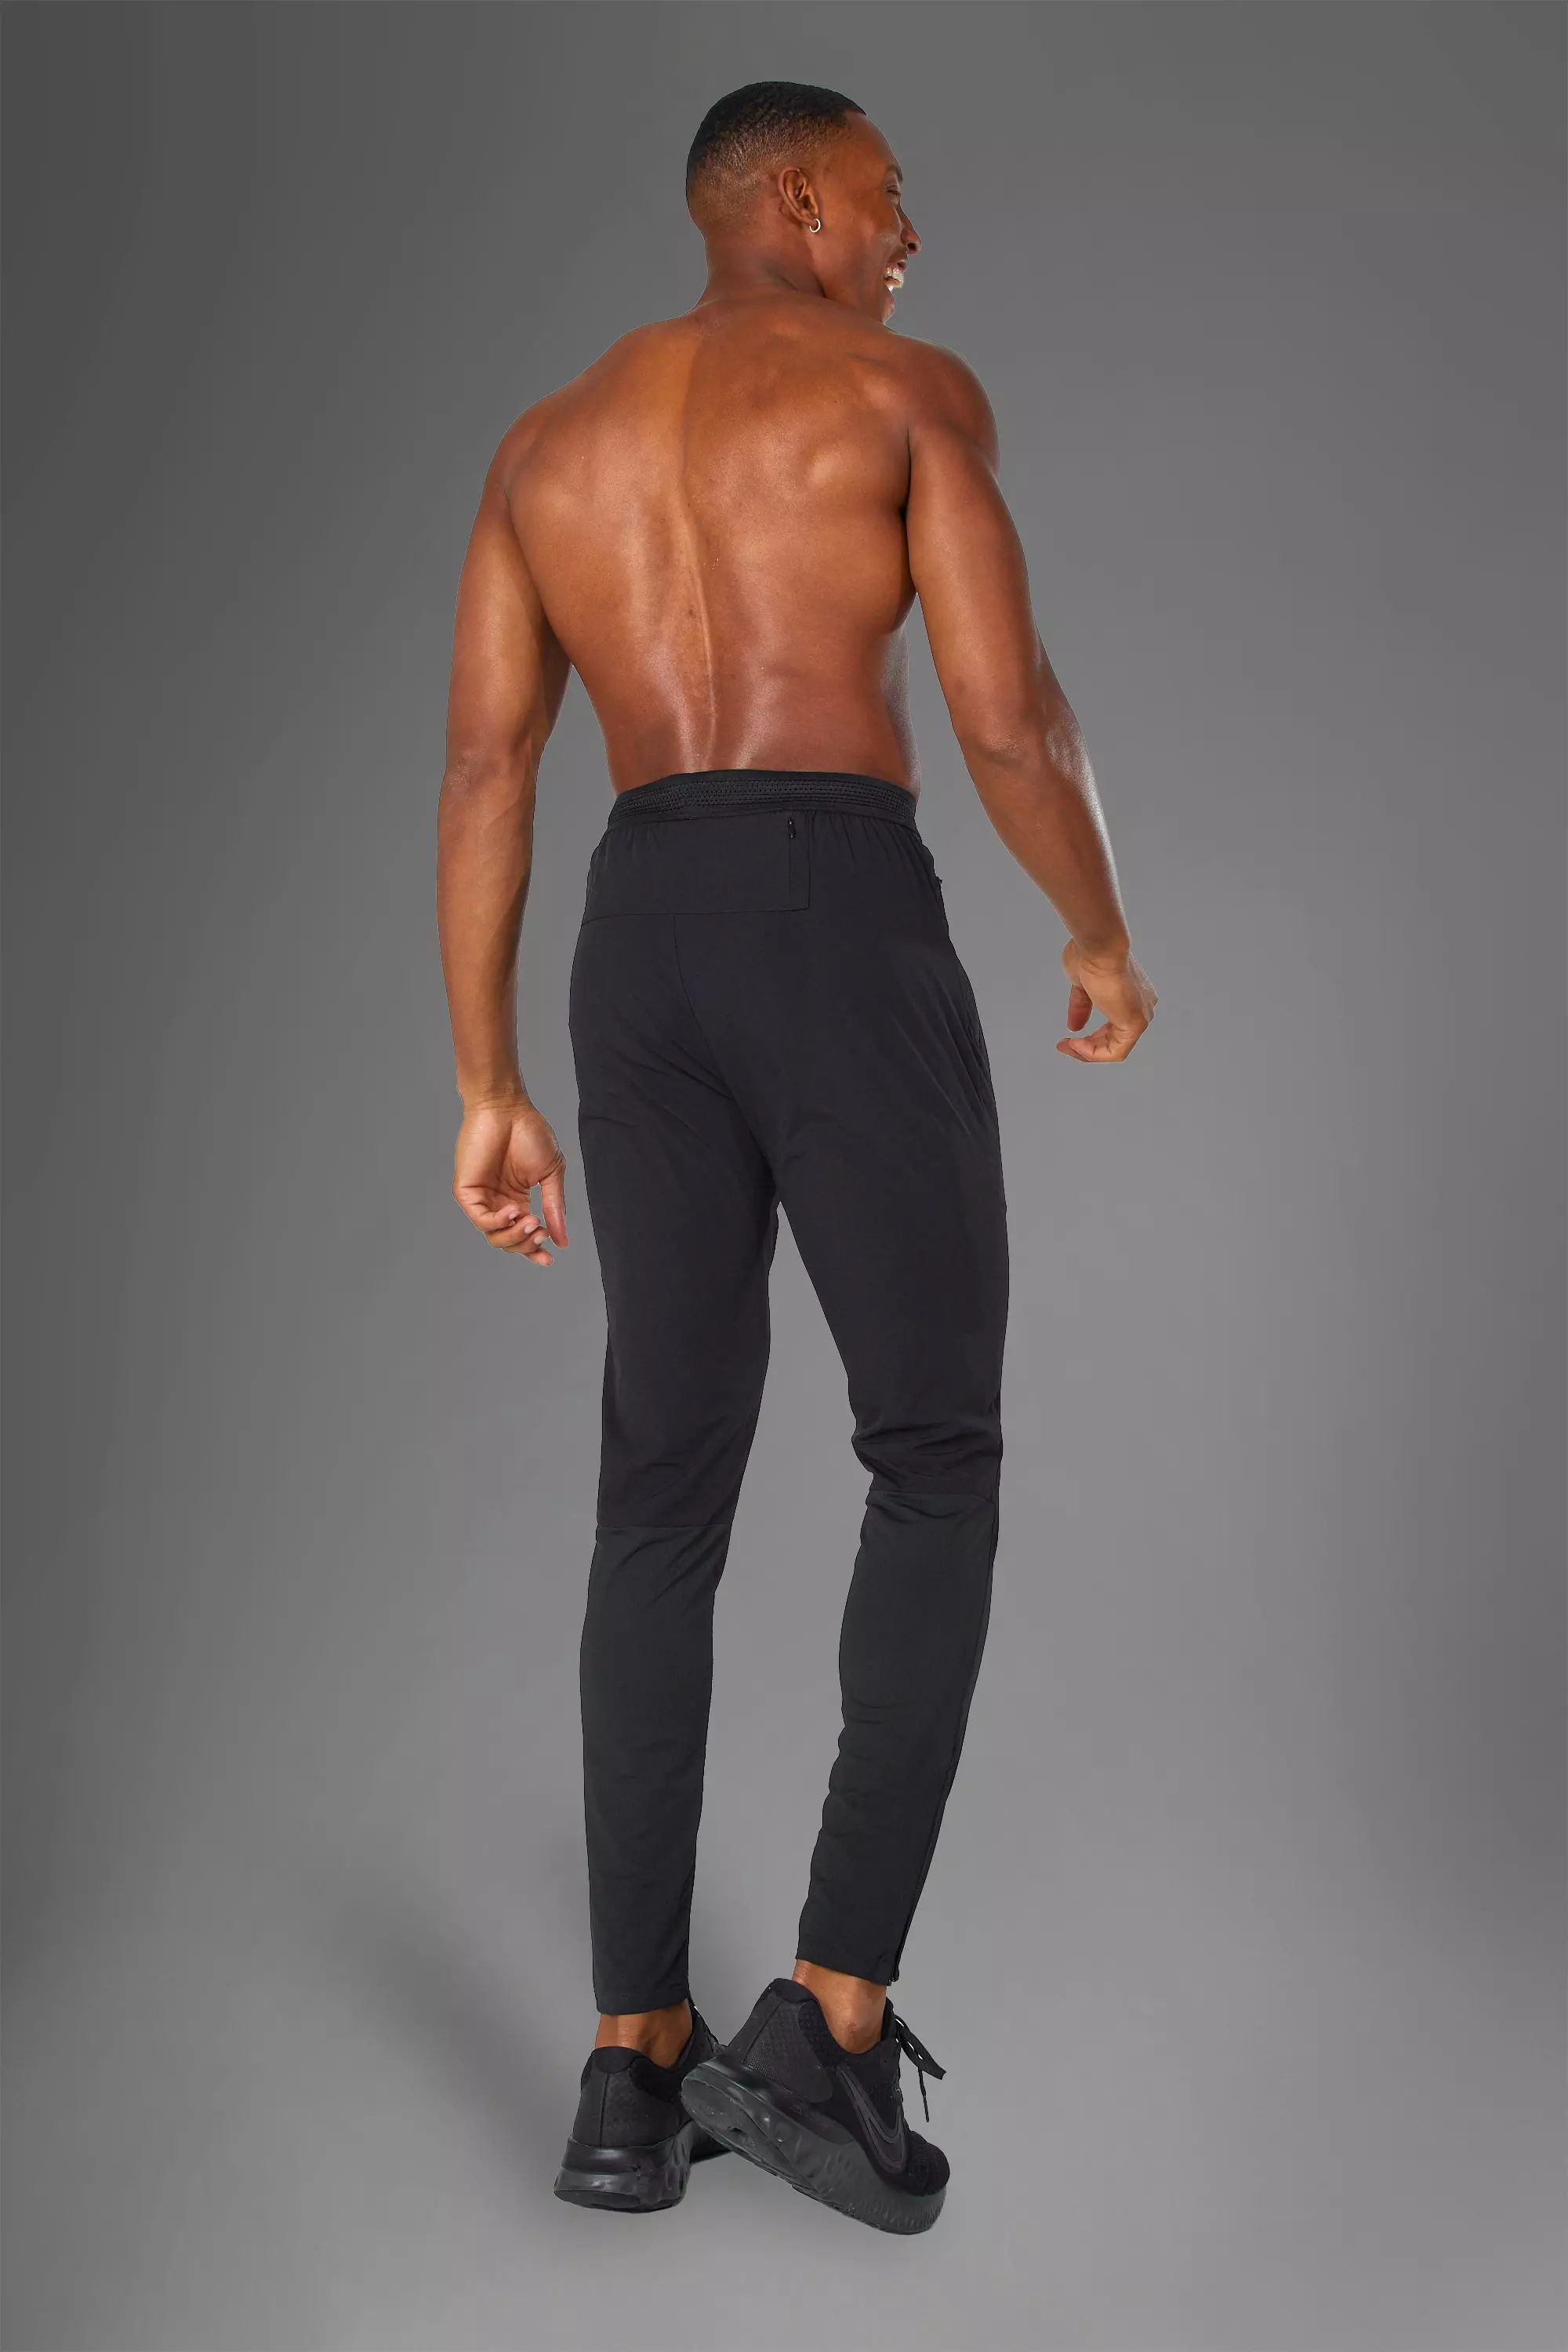 Performance Jogger 2-Pack